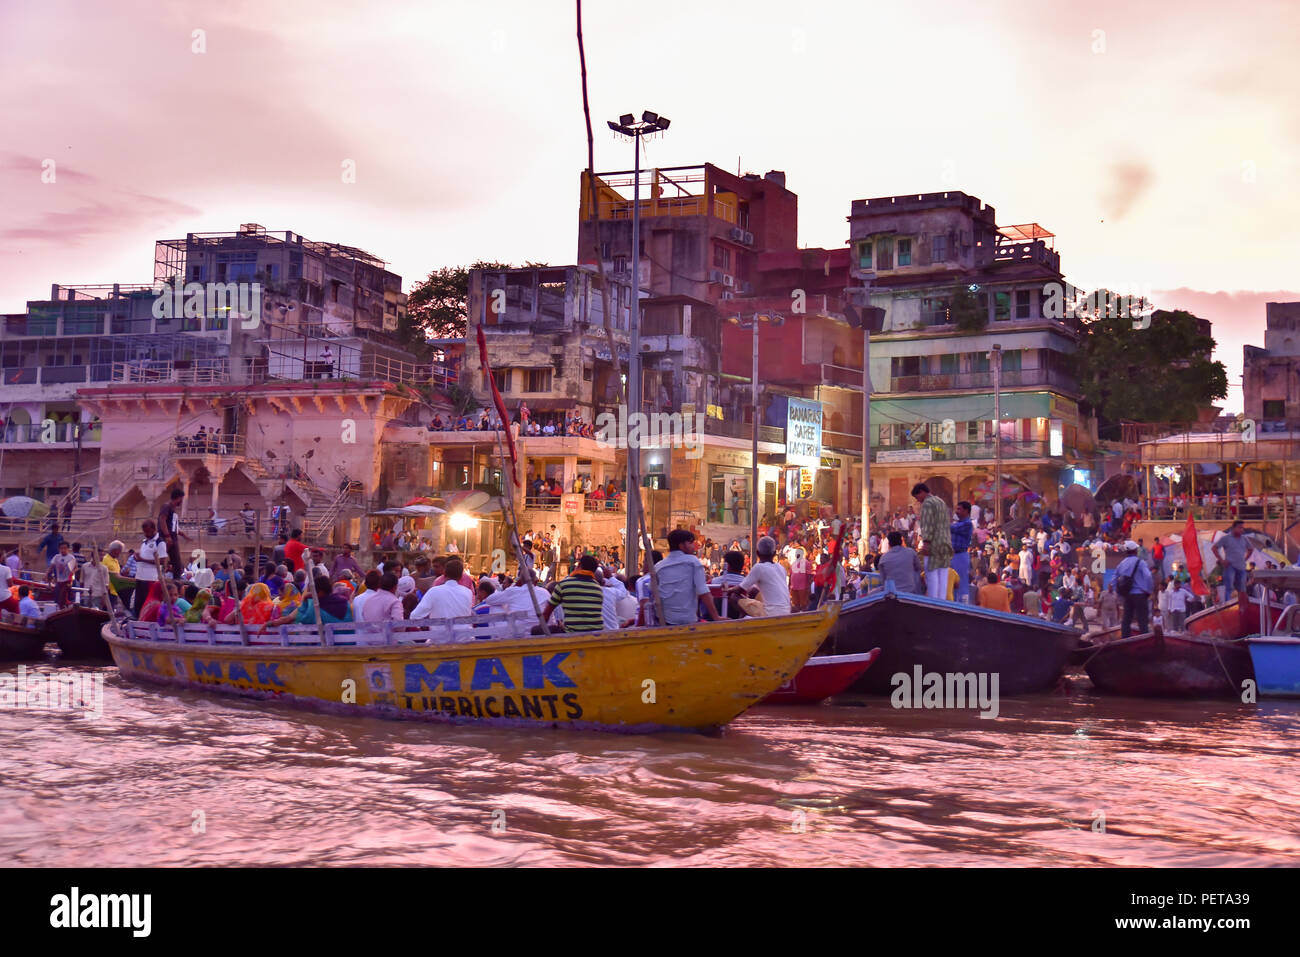 Indians and tourists on boats at Dashashwamedh Ghat on Ganges river at evening in Varanasi, India Stock Photo